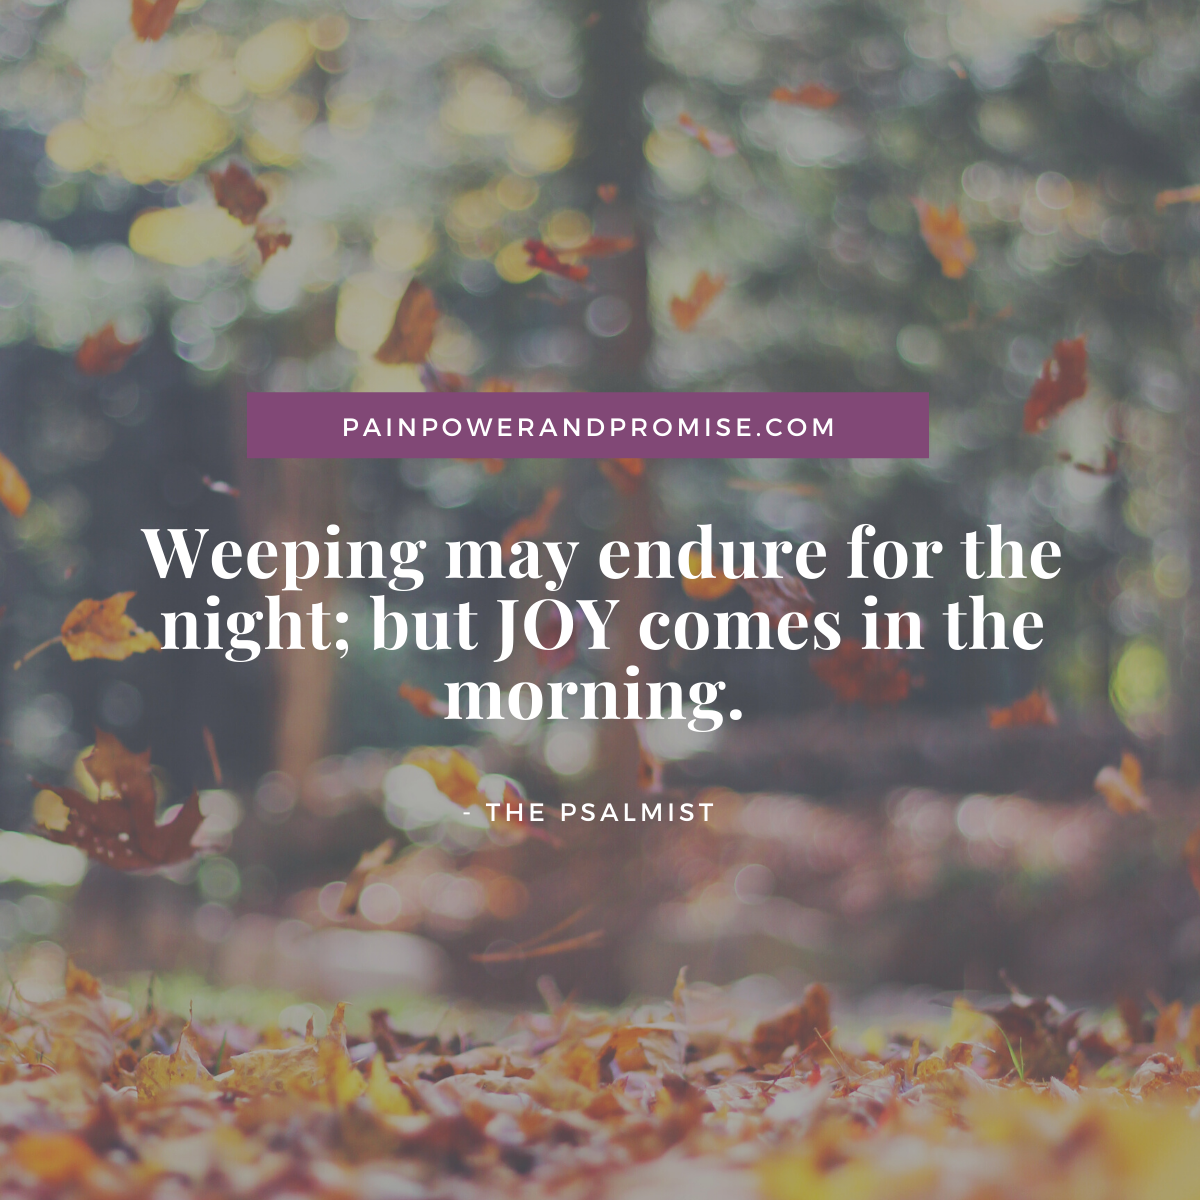 Weeping may endure for the night, but JOY comes in the morning.